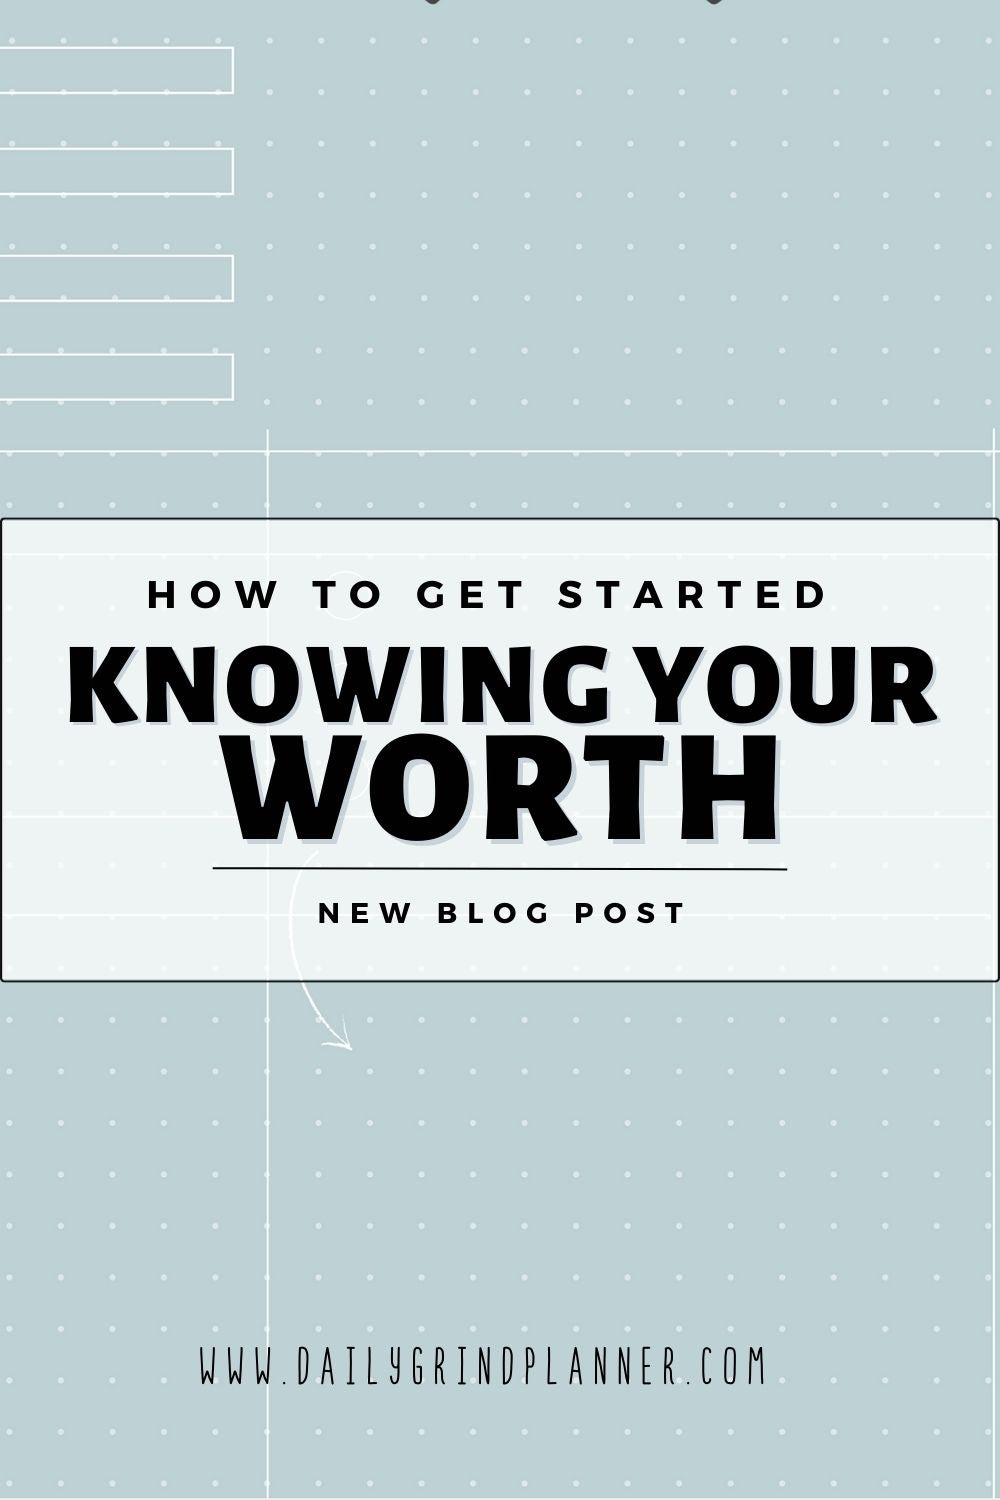 KNOWING YOUR WORTH: HOW TO GET STARTED